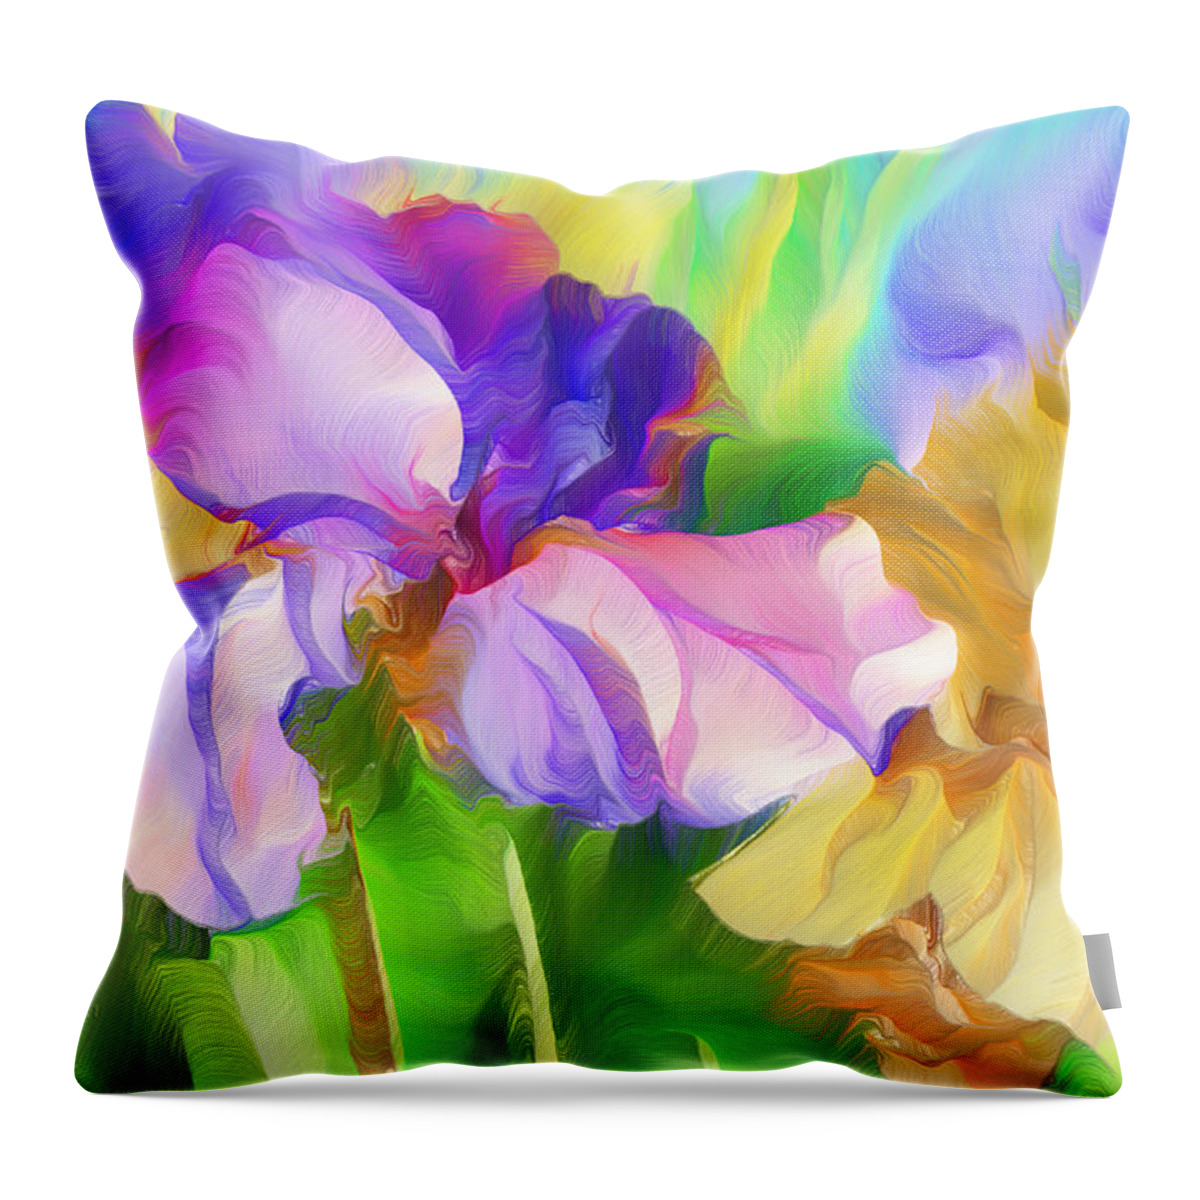 Expressionism Throw Pillow featuring the mixed media Voices Of Spring by Georgiana Romanovna